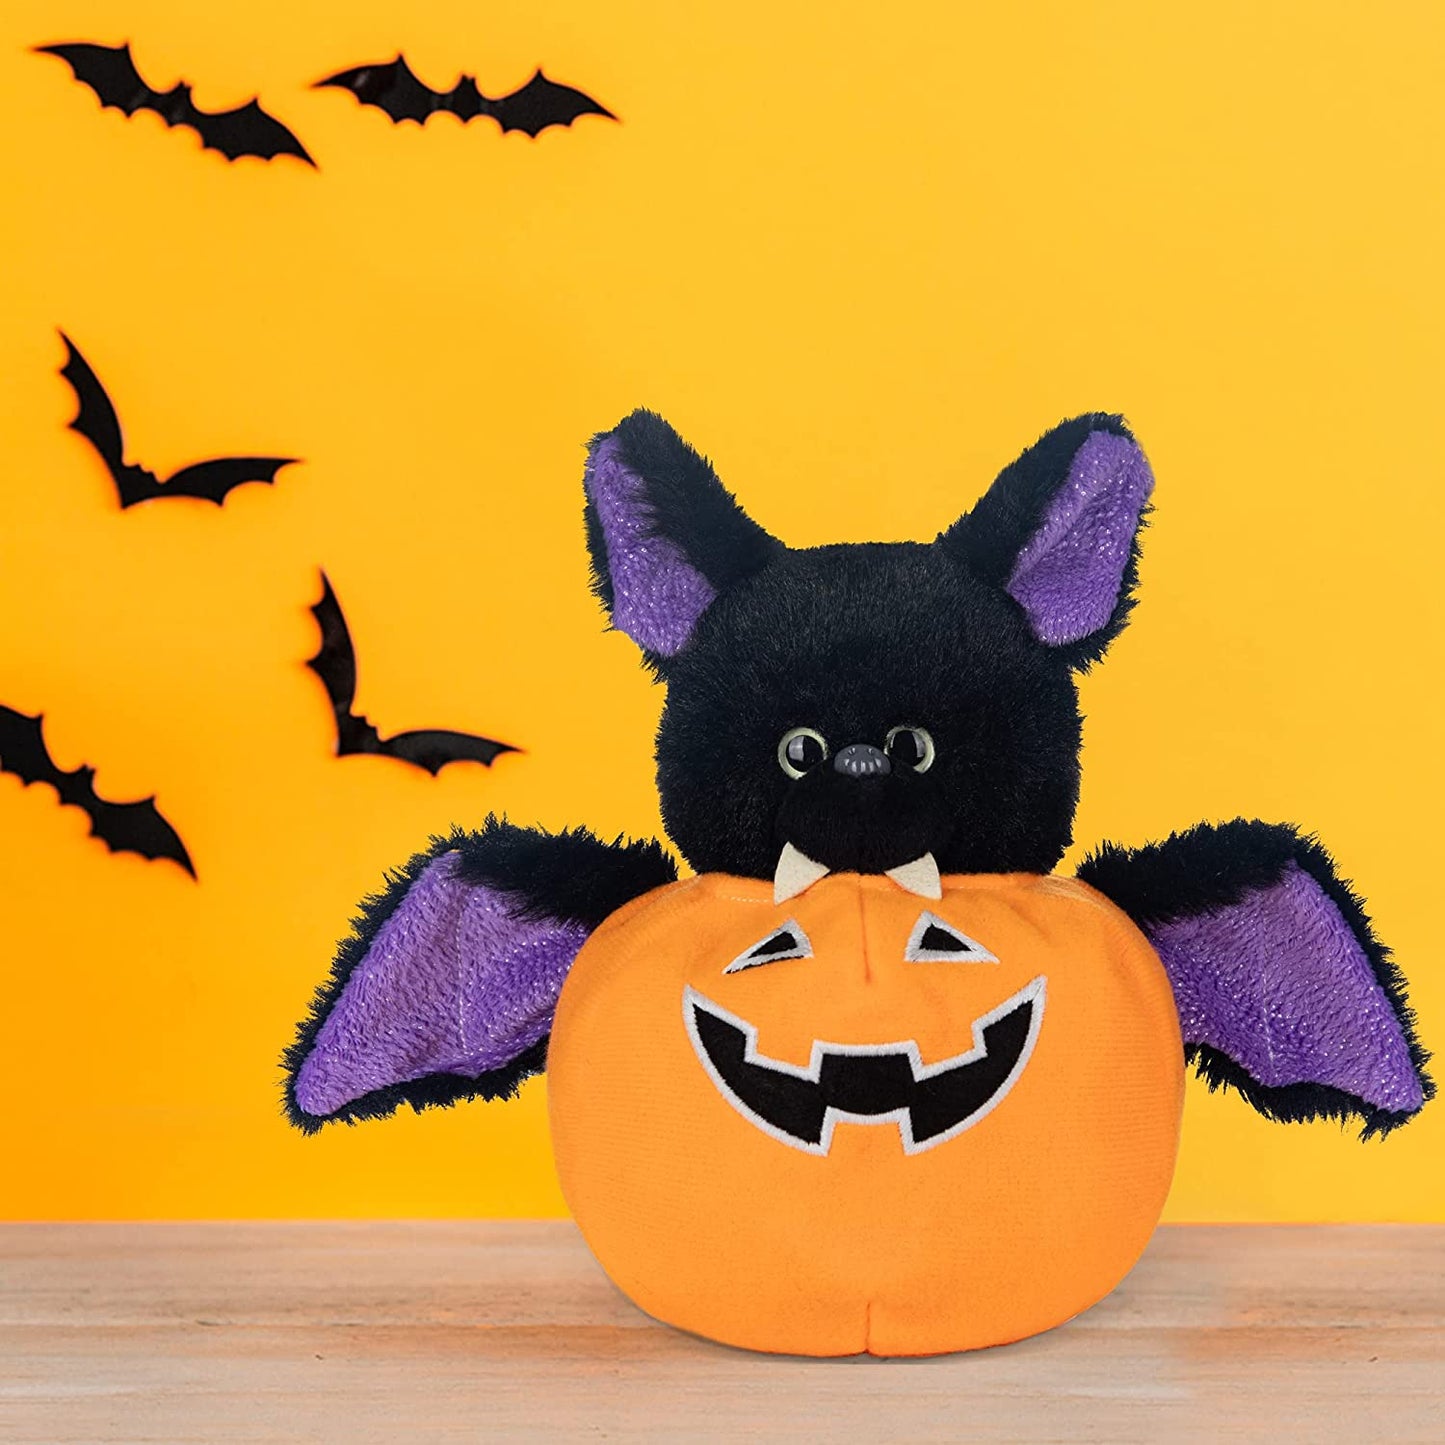 My Oli Stuffed Animal Plush Halloween Toy Plush Pumpkins with Removable Bat Glow in the Dark Toy Halloween Ornaments/Gifts for Kids Baby Toddler